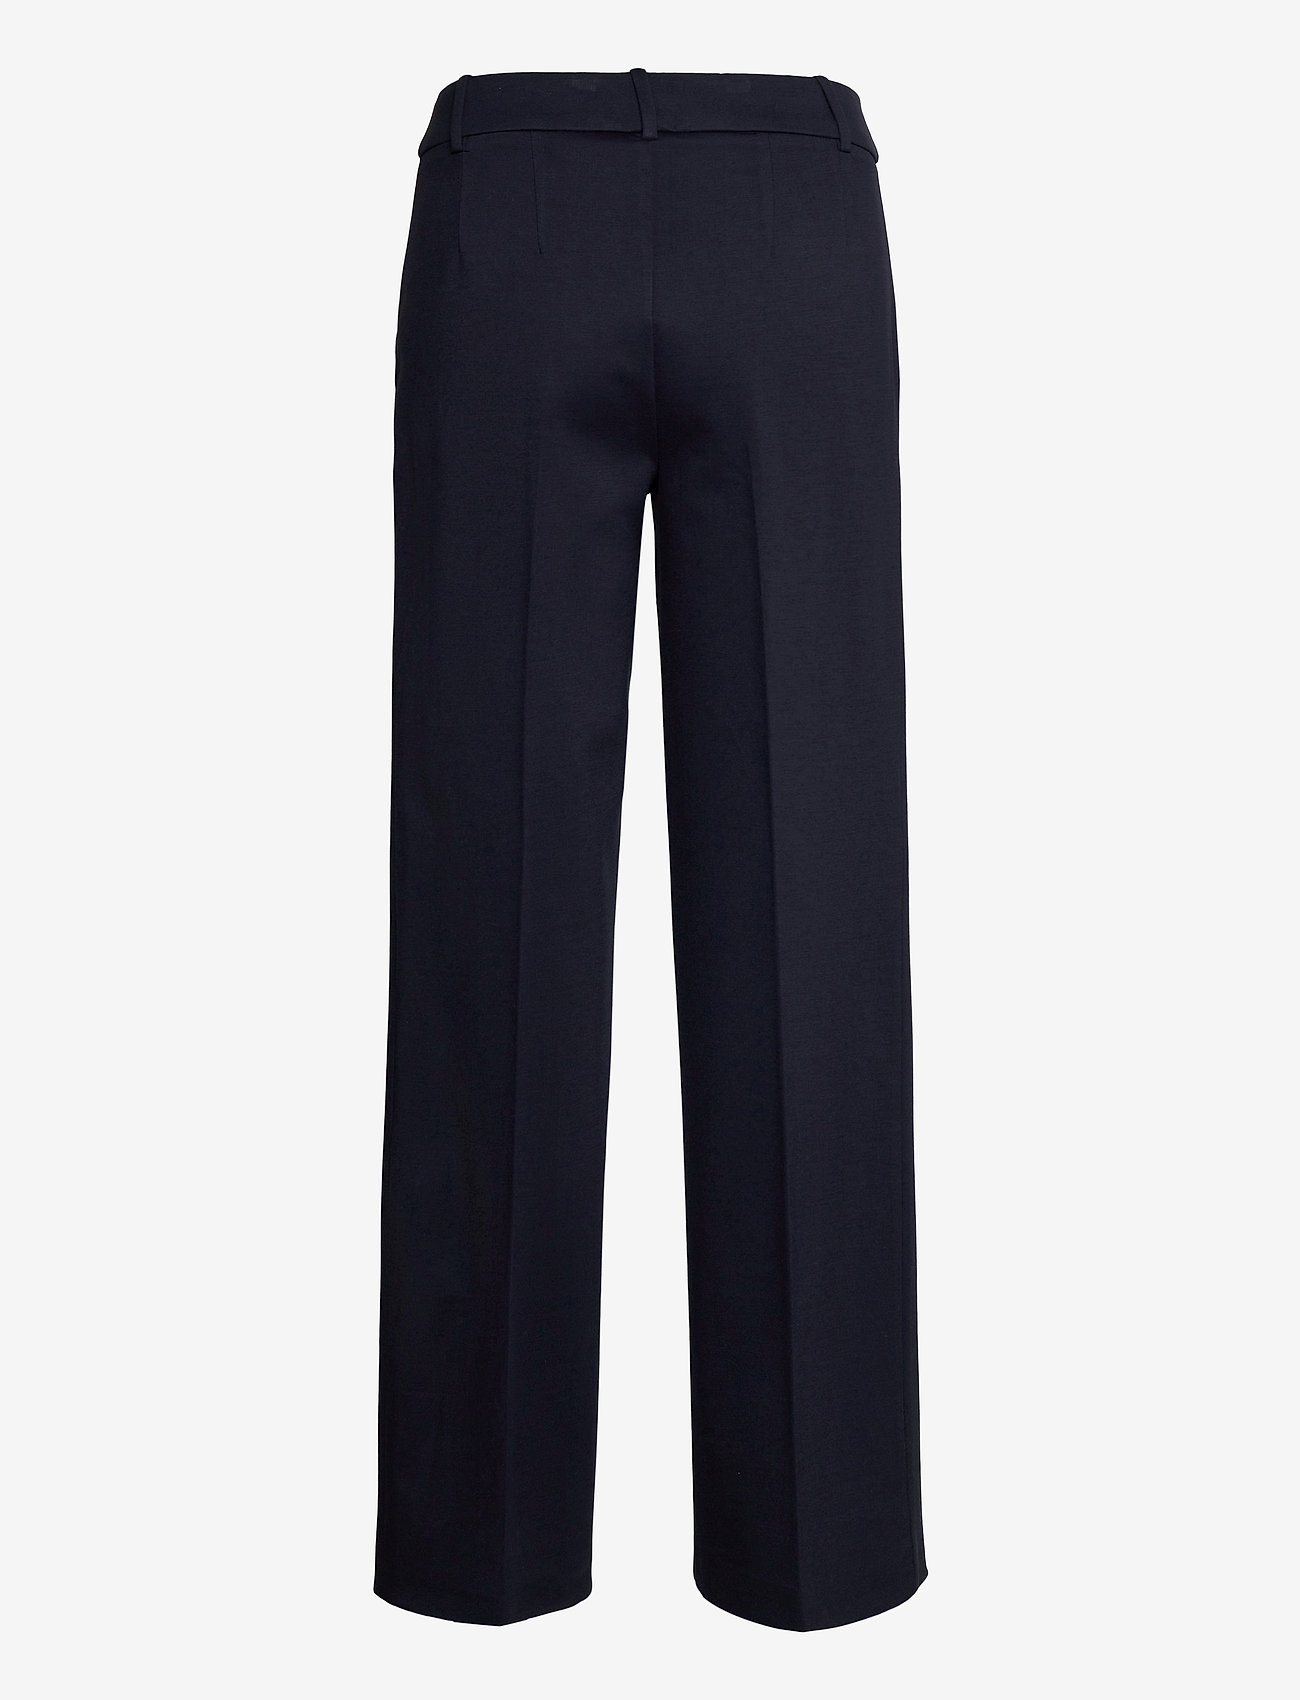 Esprit Collection - Pants woven - tailored trousers - navy - 1